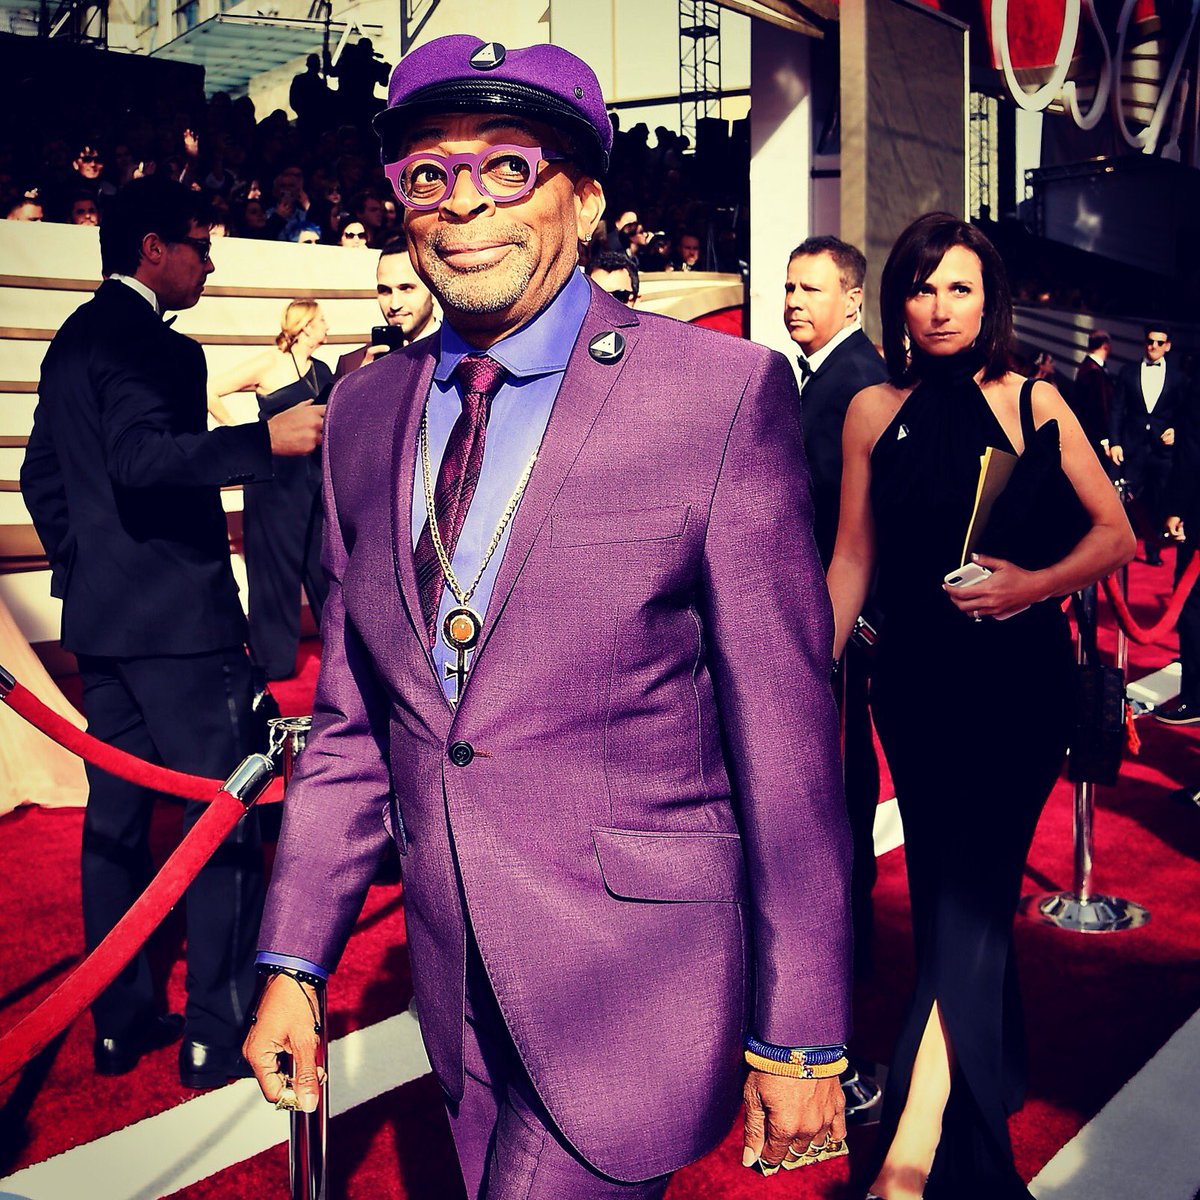 #SpikeLee at the #Oscars2019 in #OzwaldBoateng Good to see Savile Row suit there; but what’s with the shirt collar?